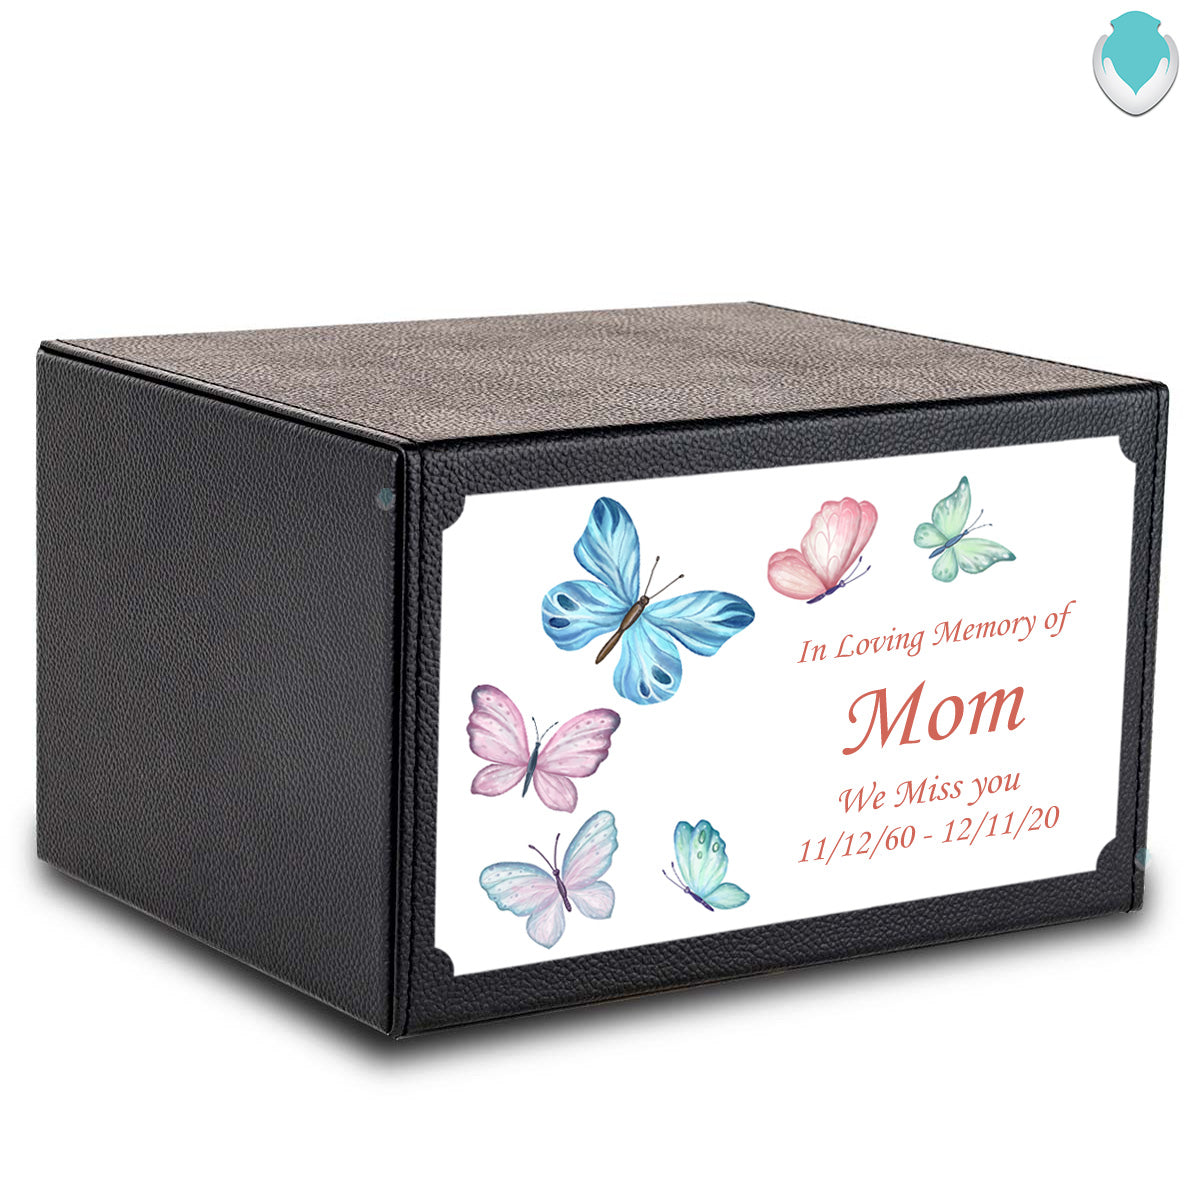 Custom Printed Heritage Leather Butterflies Wood Box Cremation Urn